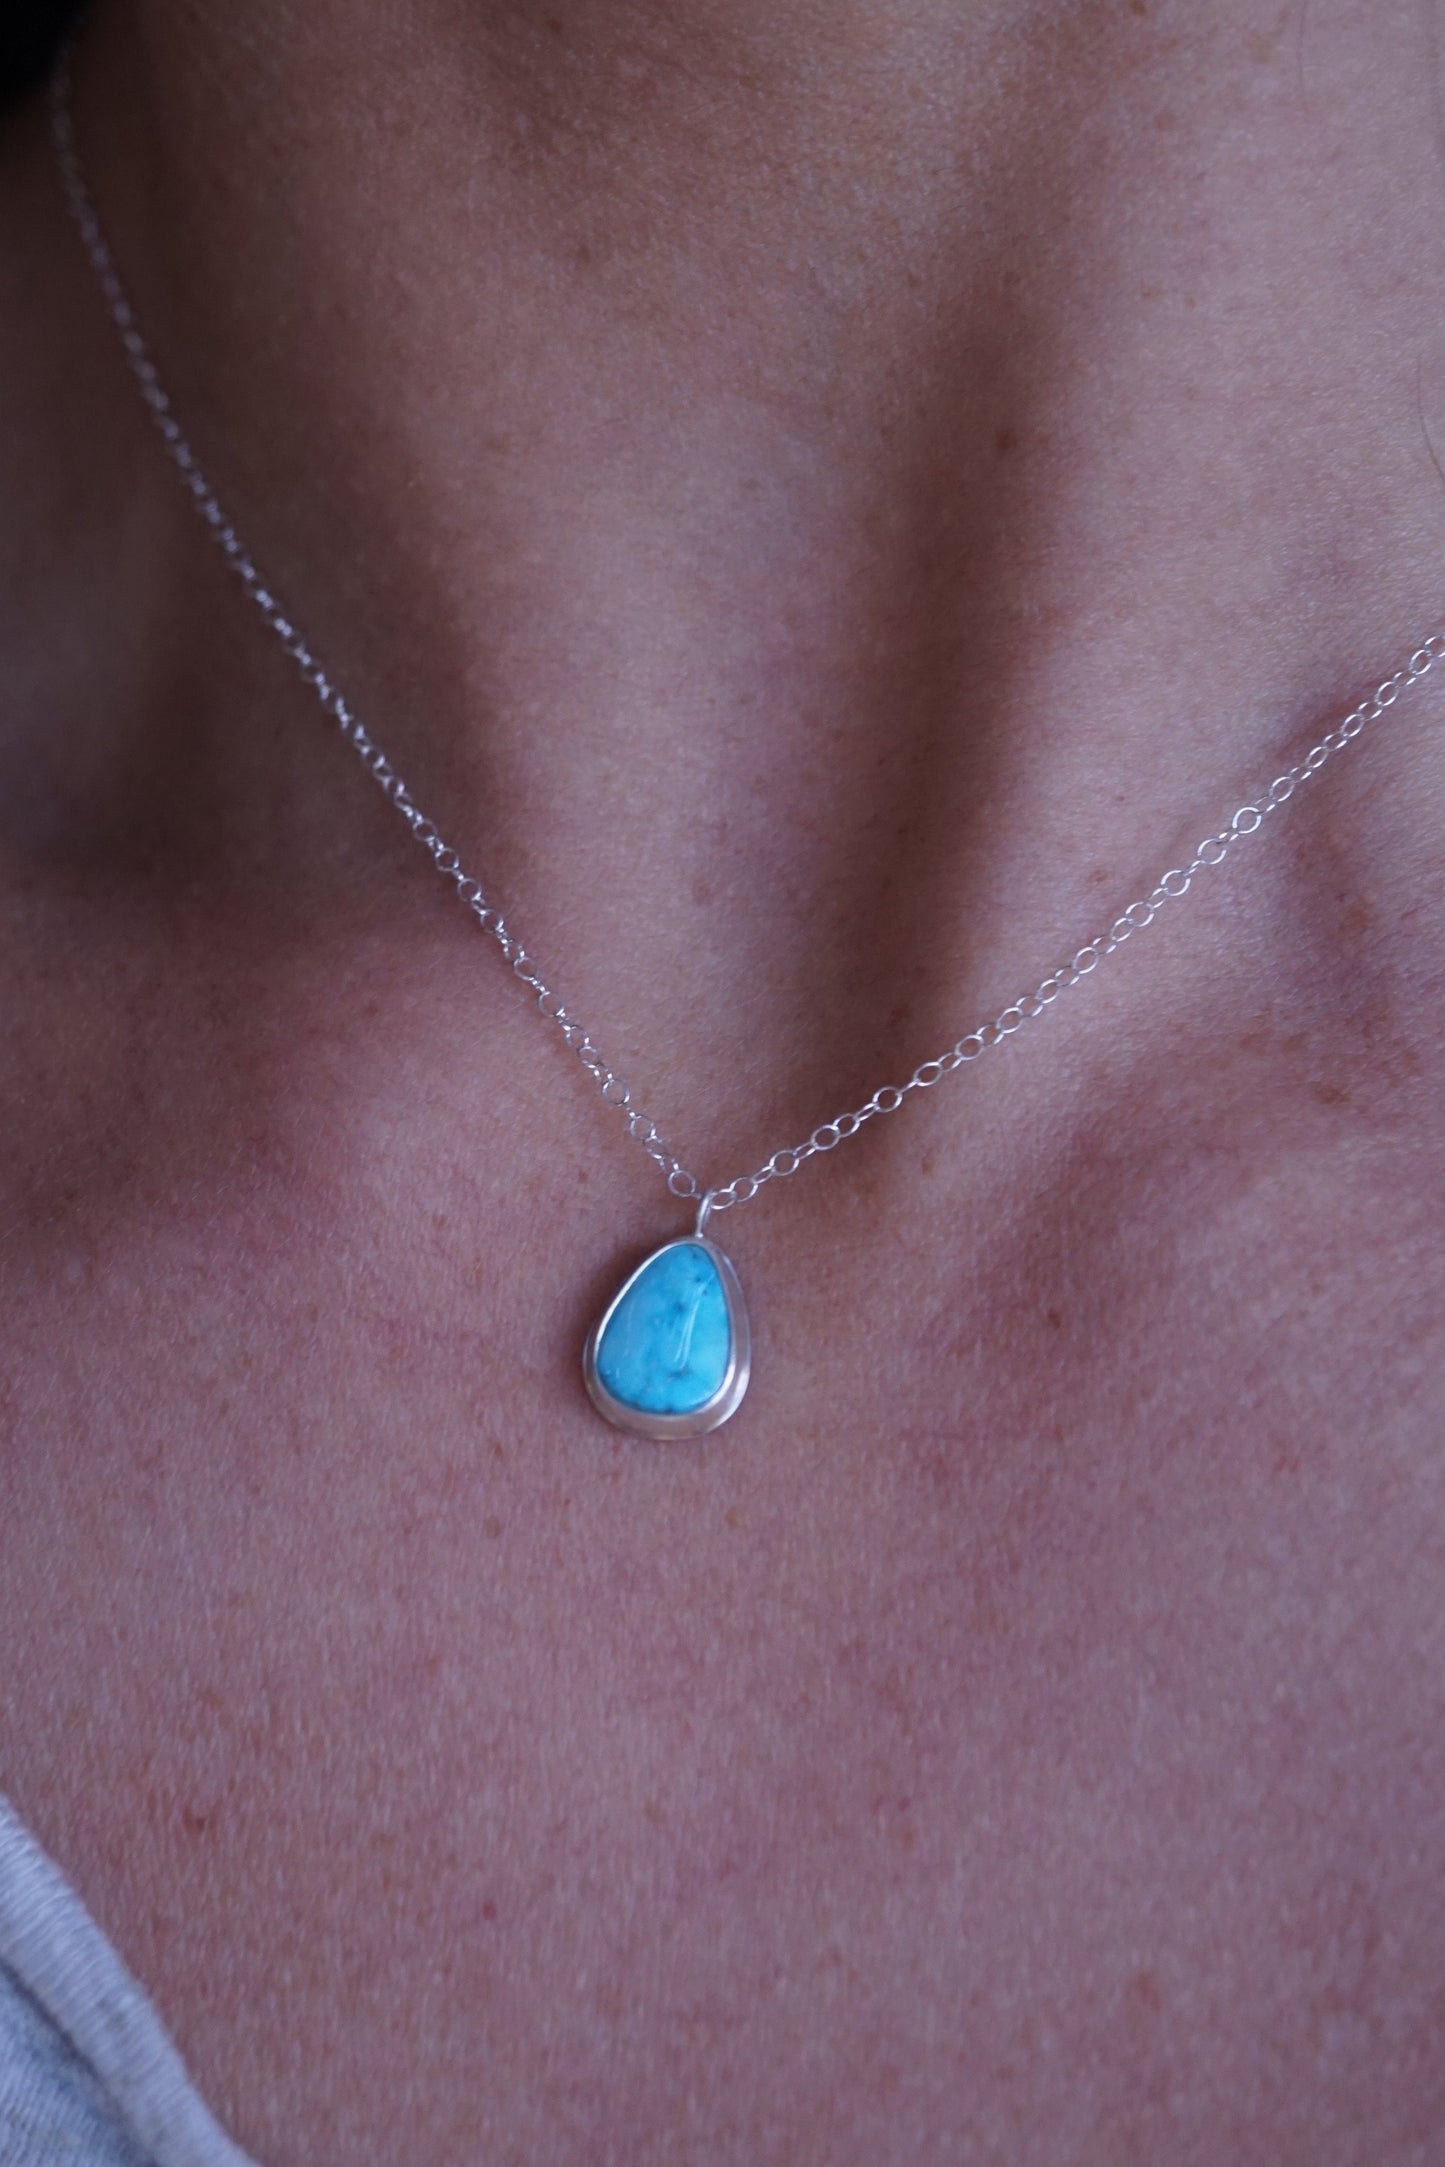 dainty kingman turquoise + silver necklace - 16" chain - Lumenrose